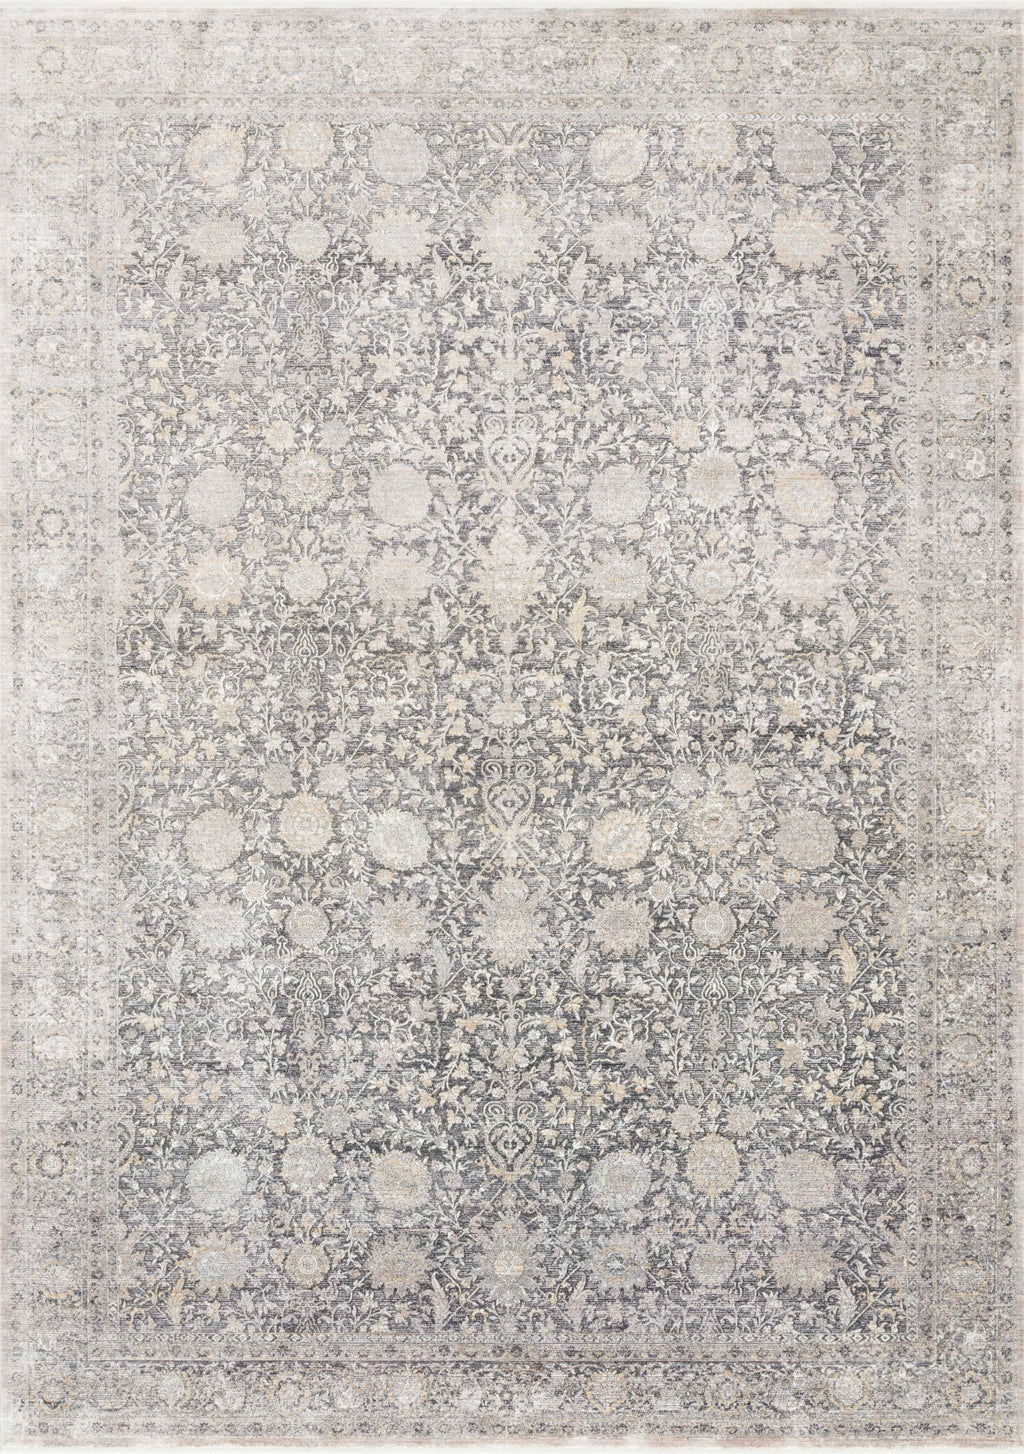 GEMMA Collection Rug  in  CHARCOAL / SAND Gray Runner Power-Loomed Viscose/Acrylic